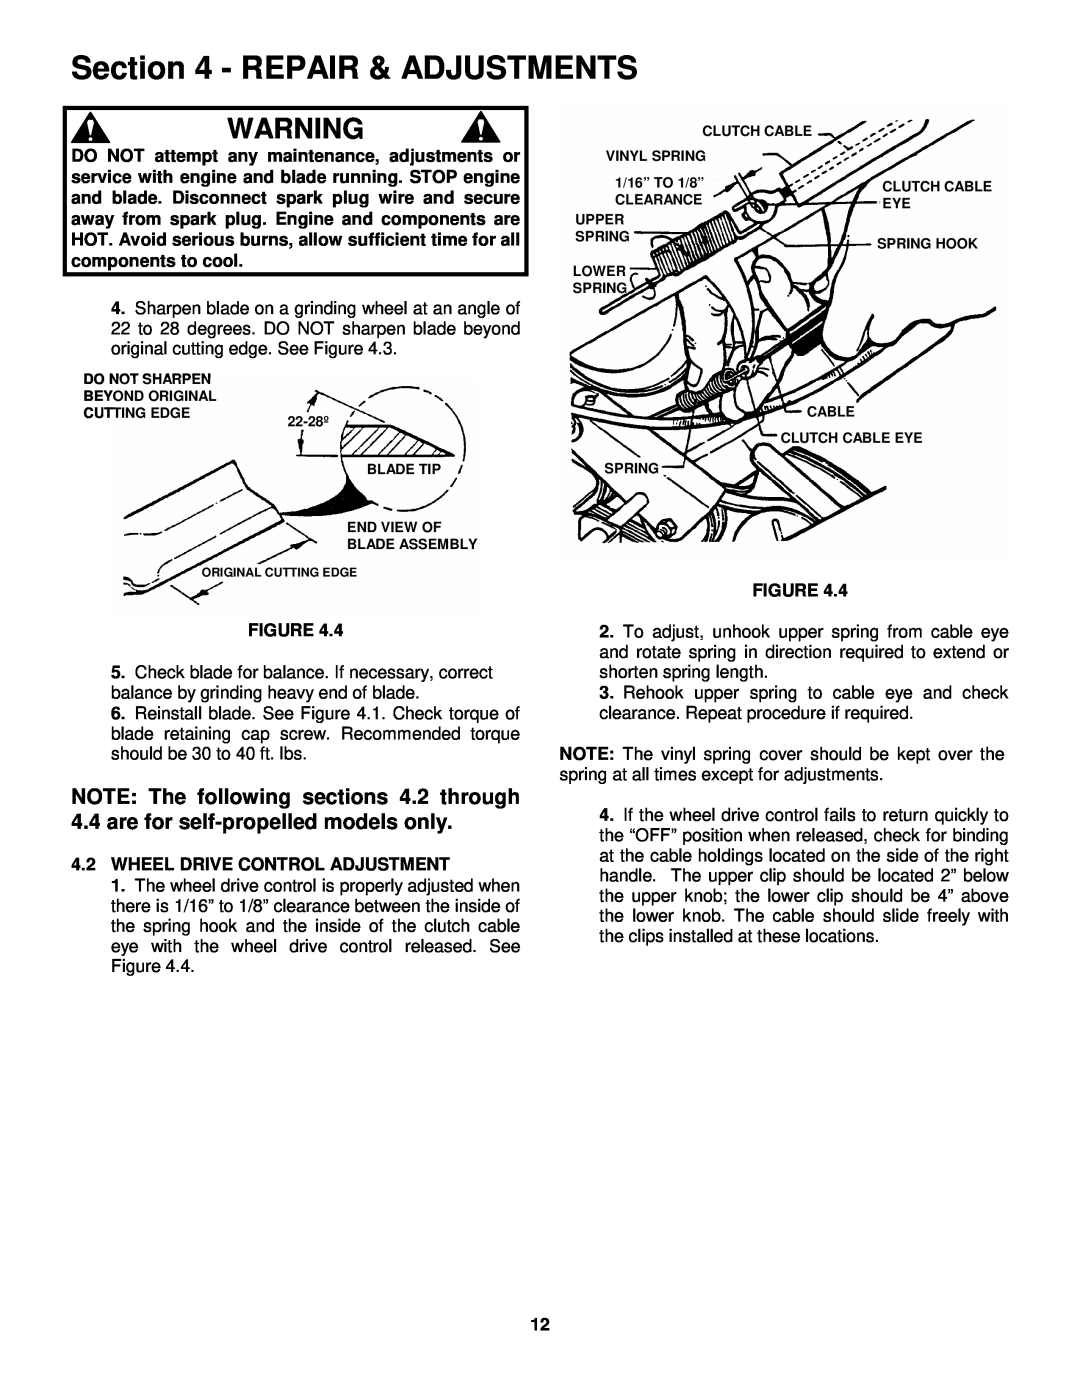 Snapper FRP216016 important safety instructions Repair & Adjustments, 4.2WHEEL DRIVE CONTROL ADJUSTMENT 